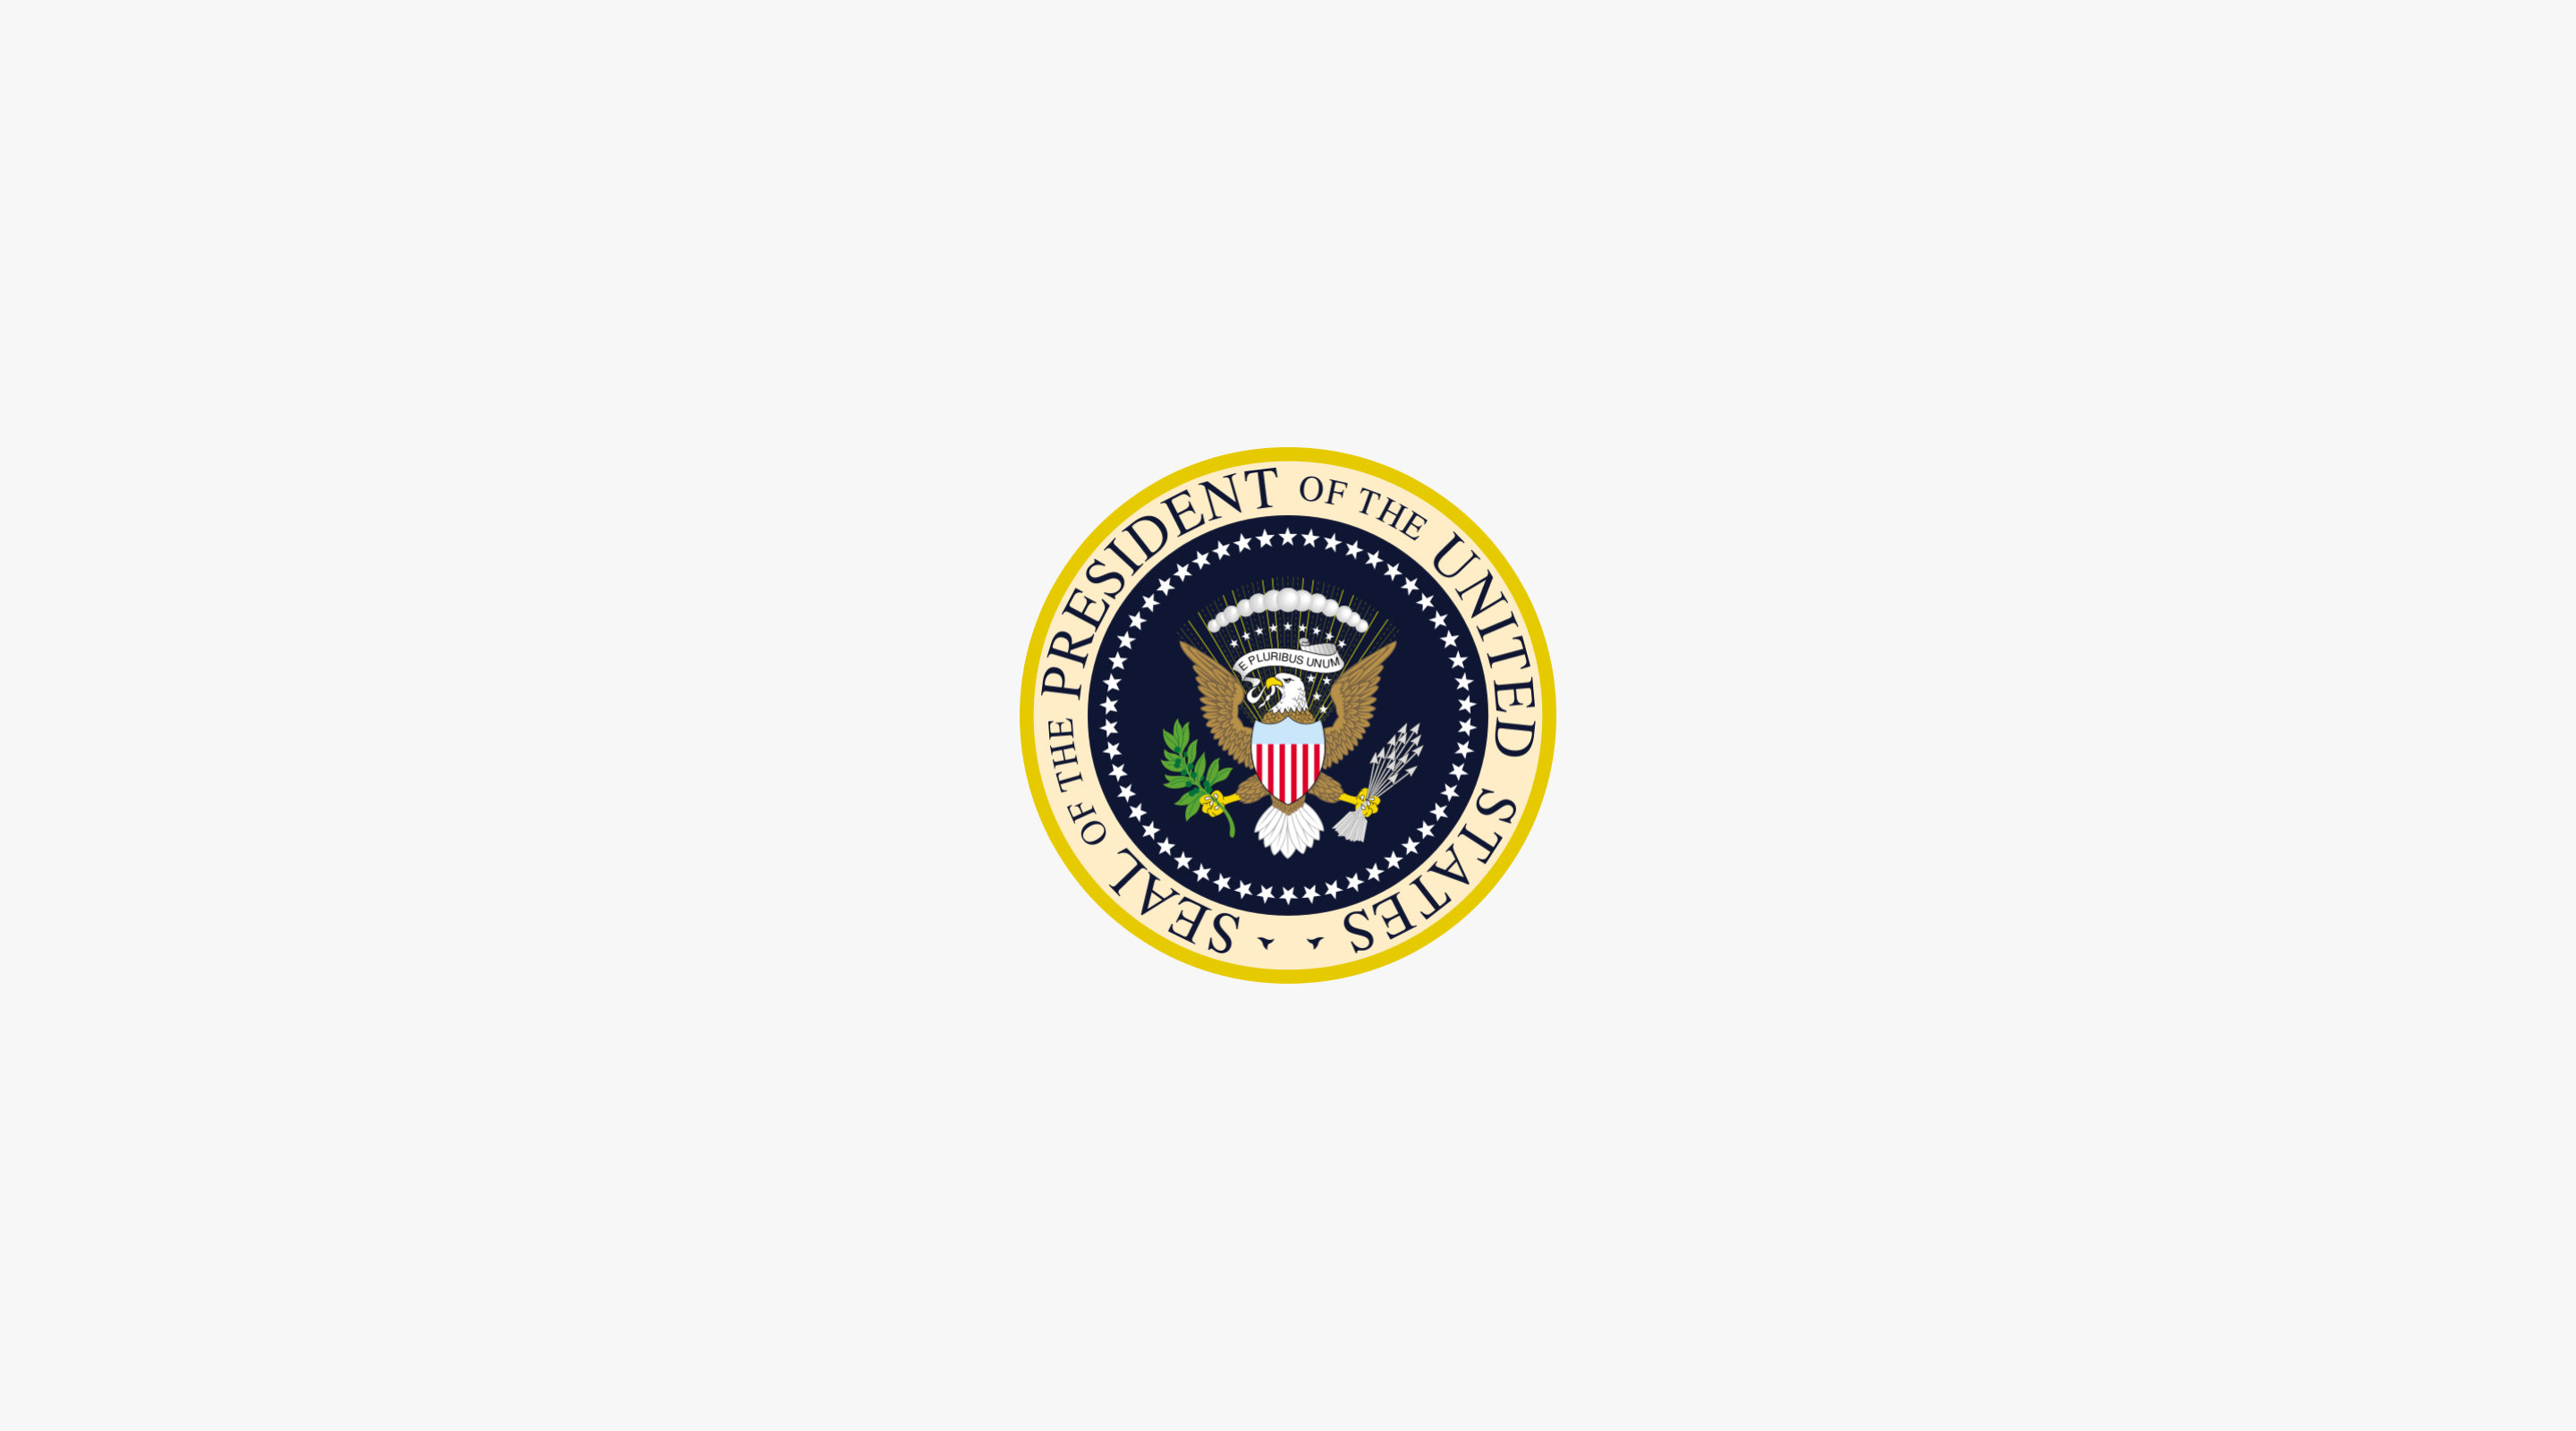 Office of the President of the United States of America logo on a neutral background